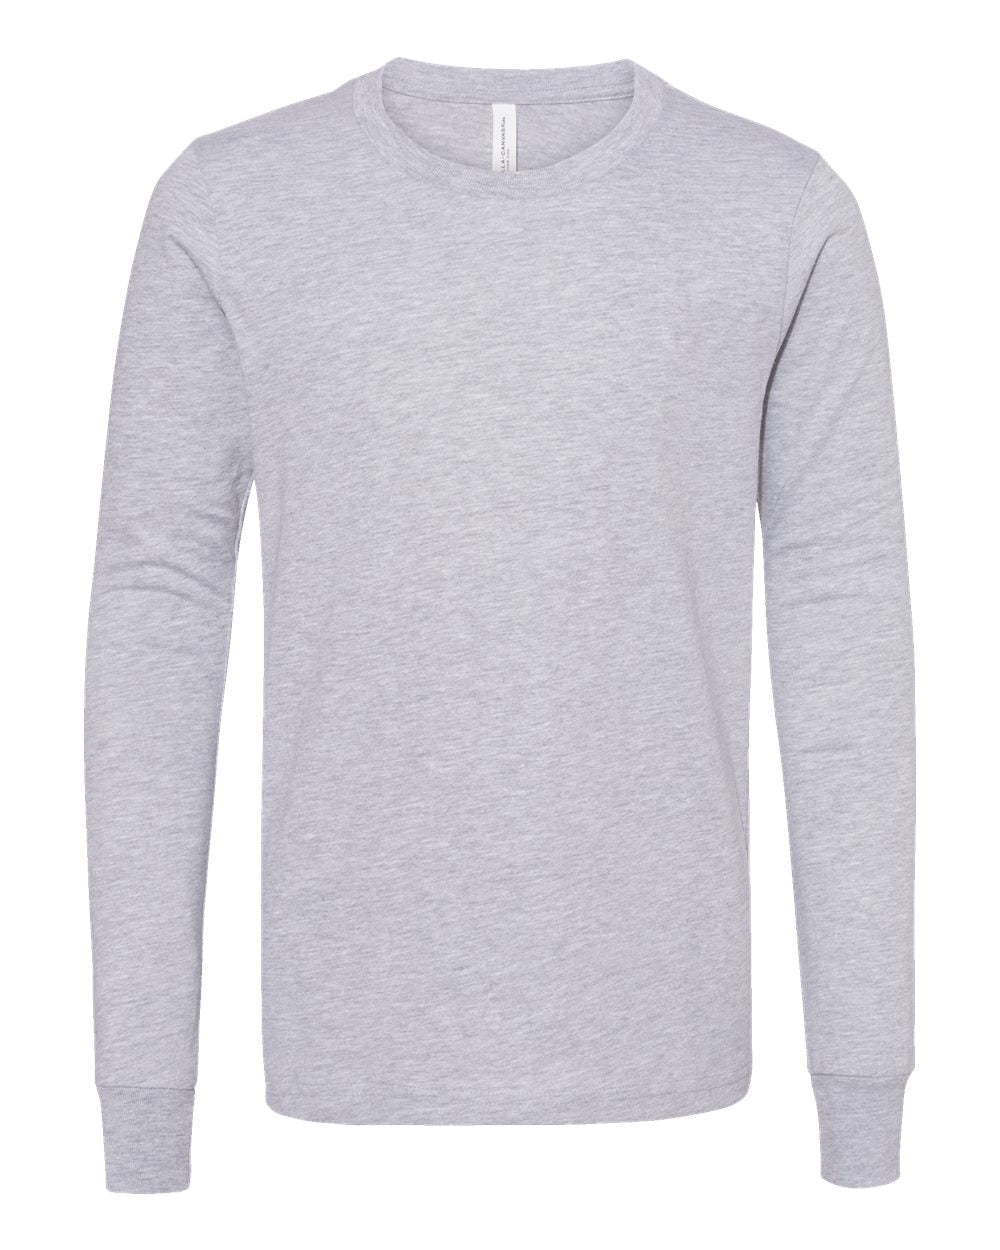 Bella + Canvas Youth Long Sleeve (3501y) in Athletic Heather